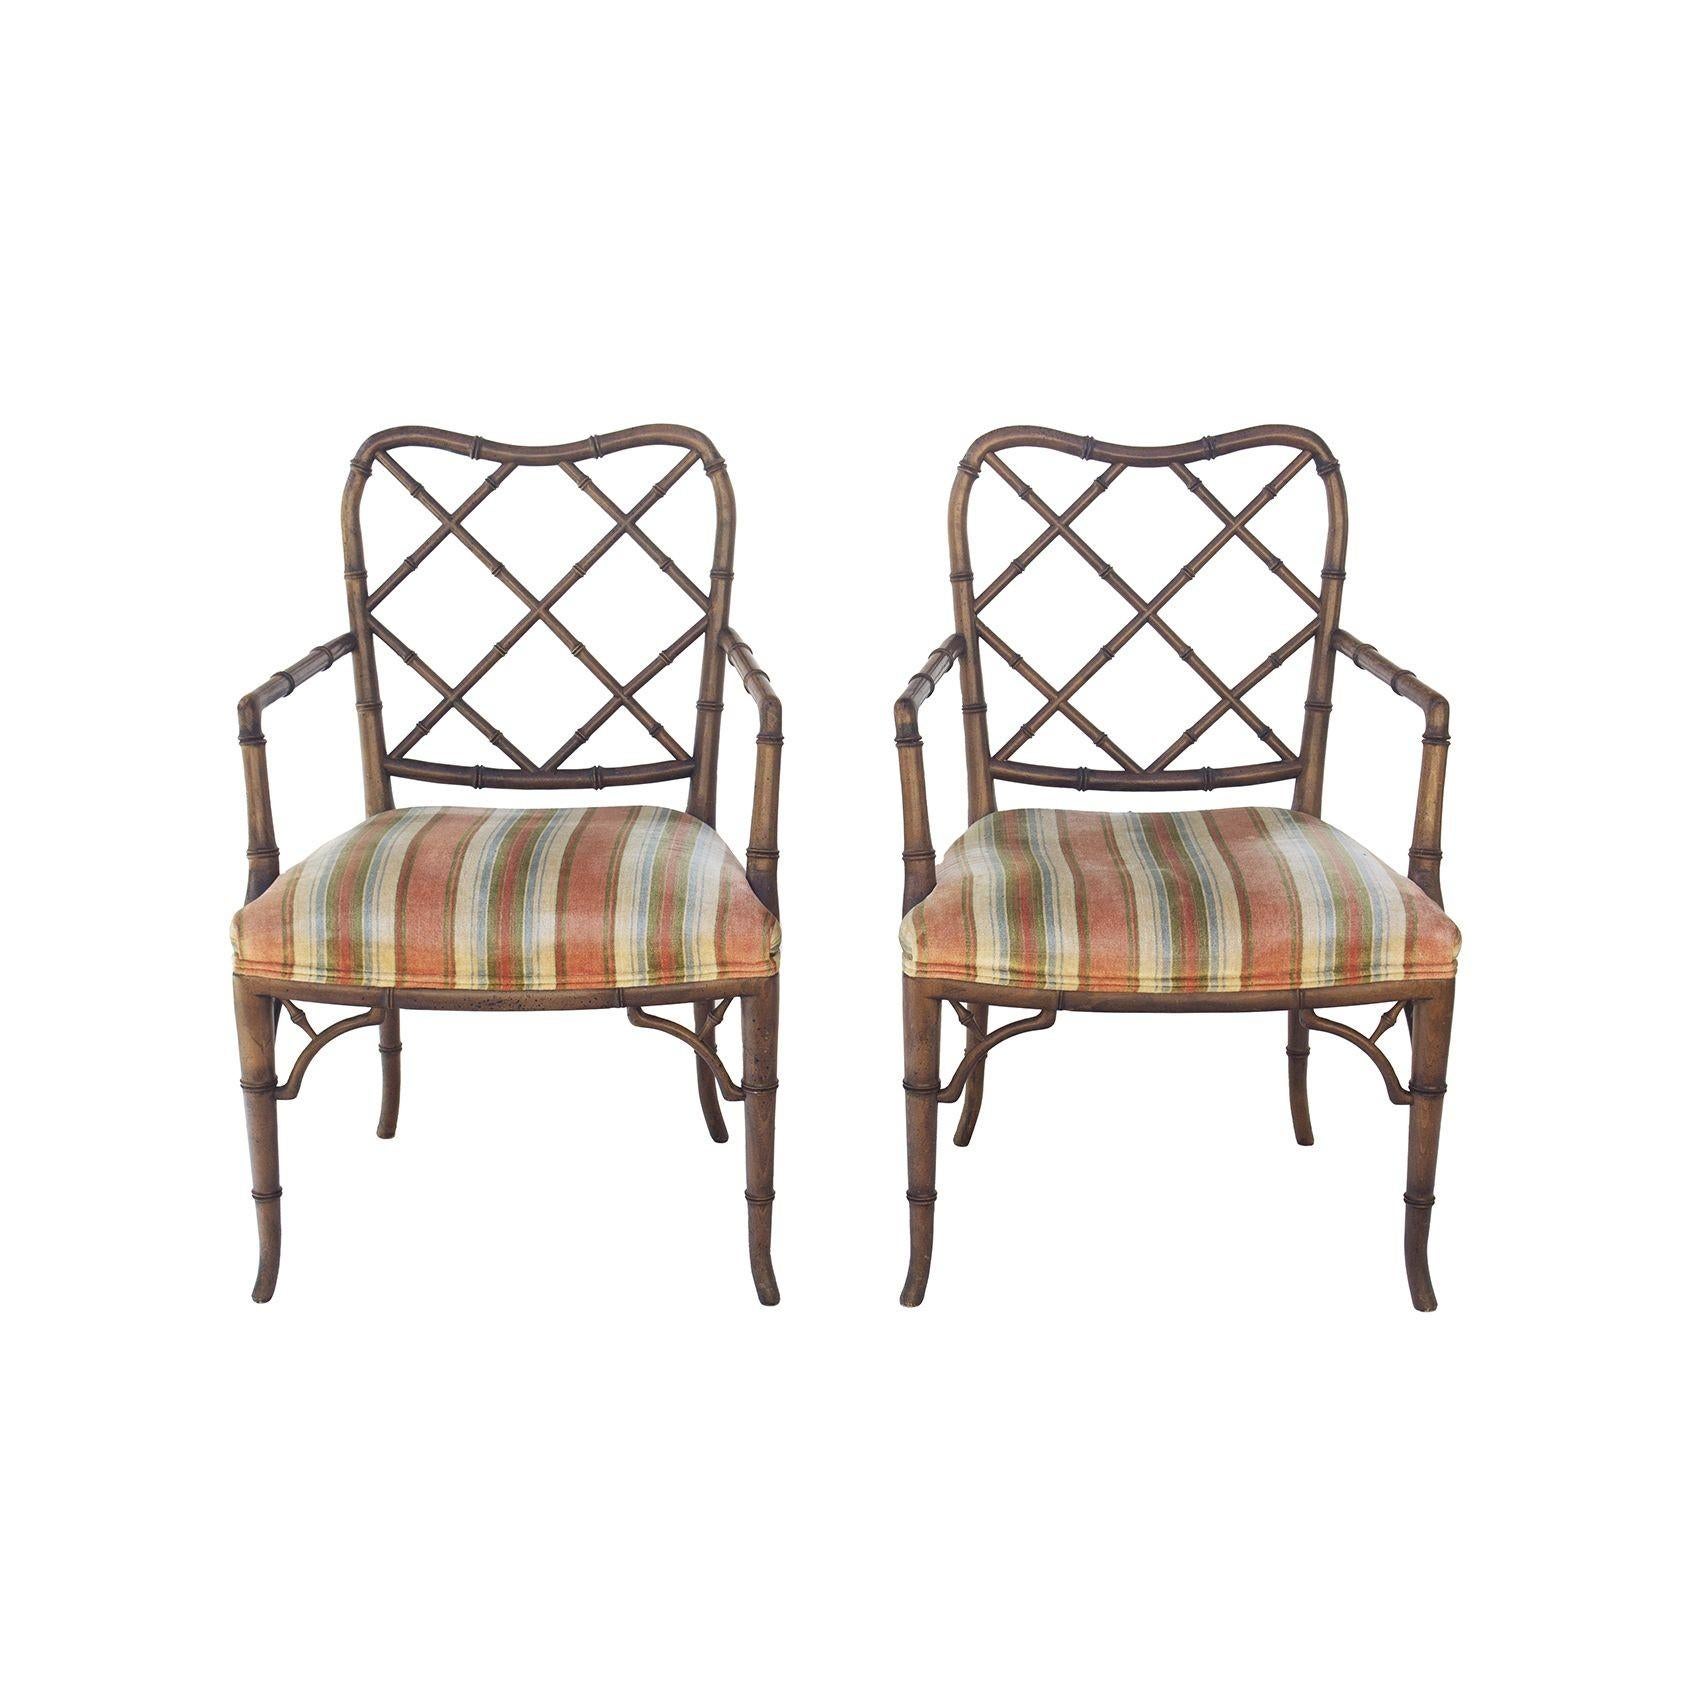 USA, 1950s
Pair of faux bamboo Hollywood Regency armchairs. Elegant and classic dining or side chairs. These had a swatch of the same seat fabric nearby labeled 'Henredon', so they are believed to be made by Henredon, though no labels remain on the